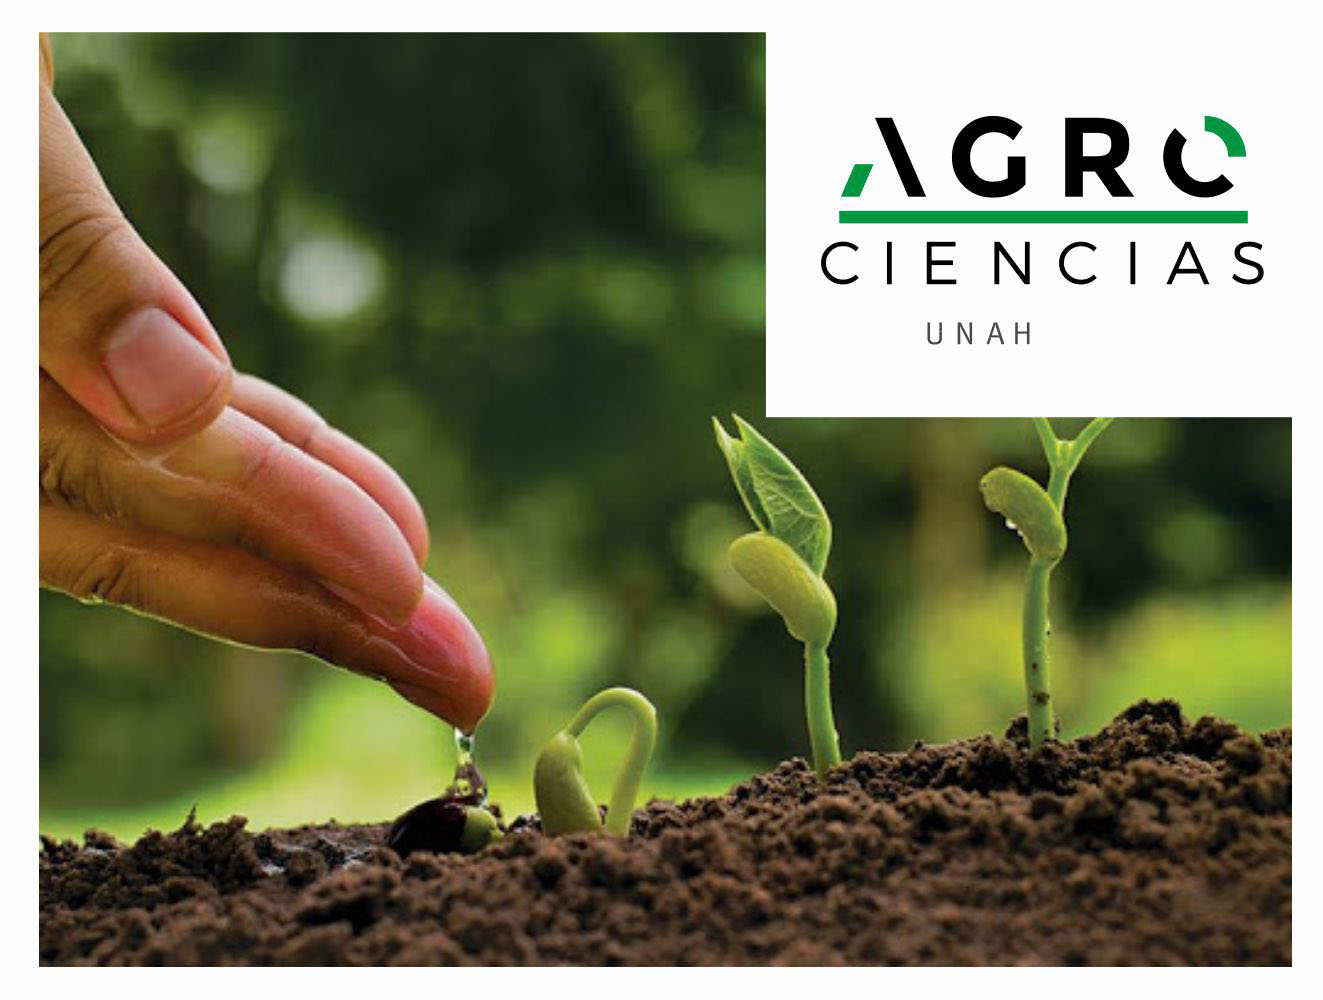 Event - INTERNATIONAL CONGRESS OF AGRICULTURAL SCIENCES   “AGROCIENCIAS 2022”